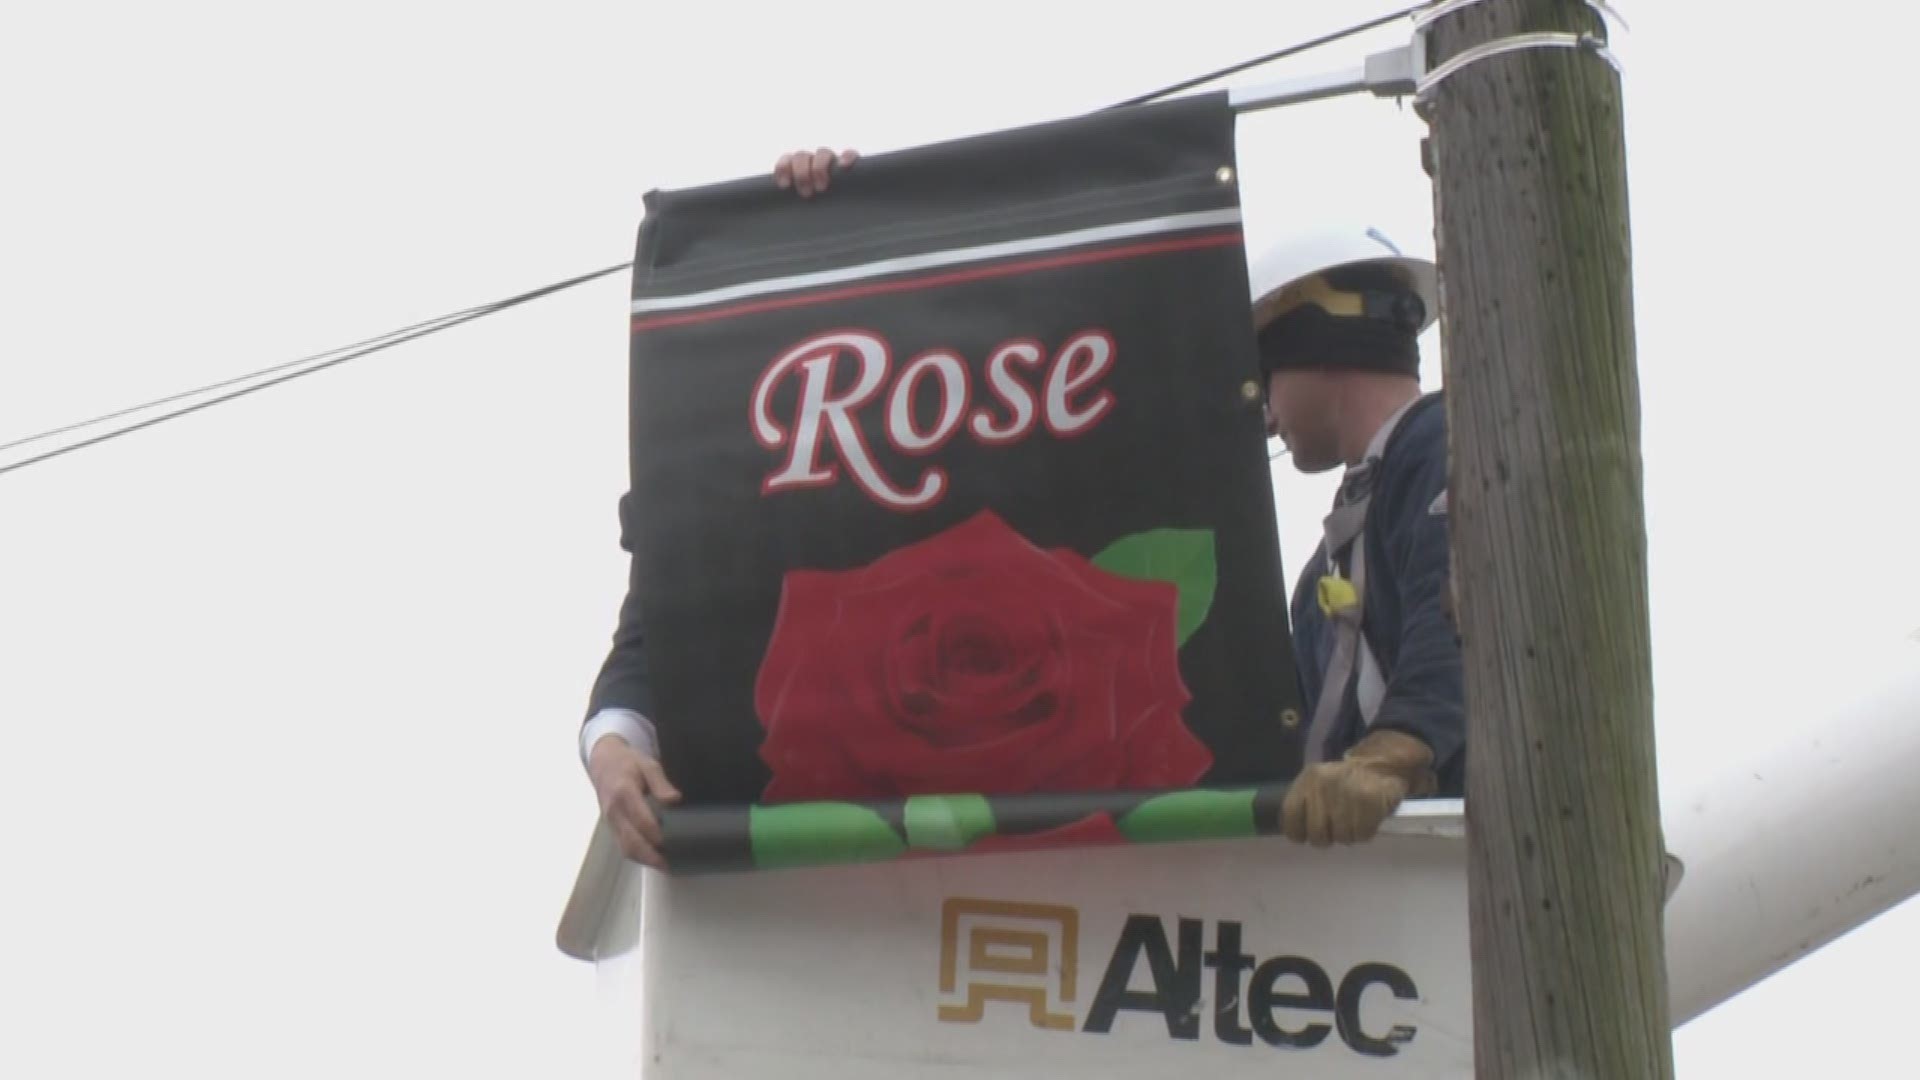 The Rose City neighborhood and business associations in North Little Rock are celebrating this Valentine’s Day by spreading the love through a new initiative.